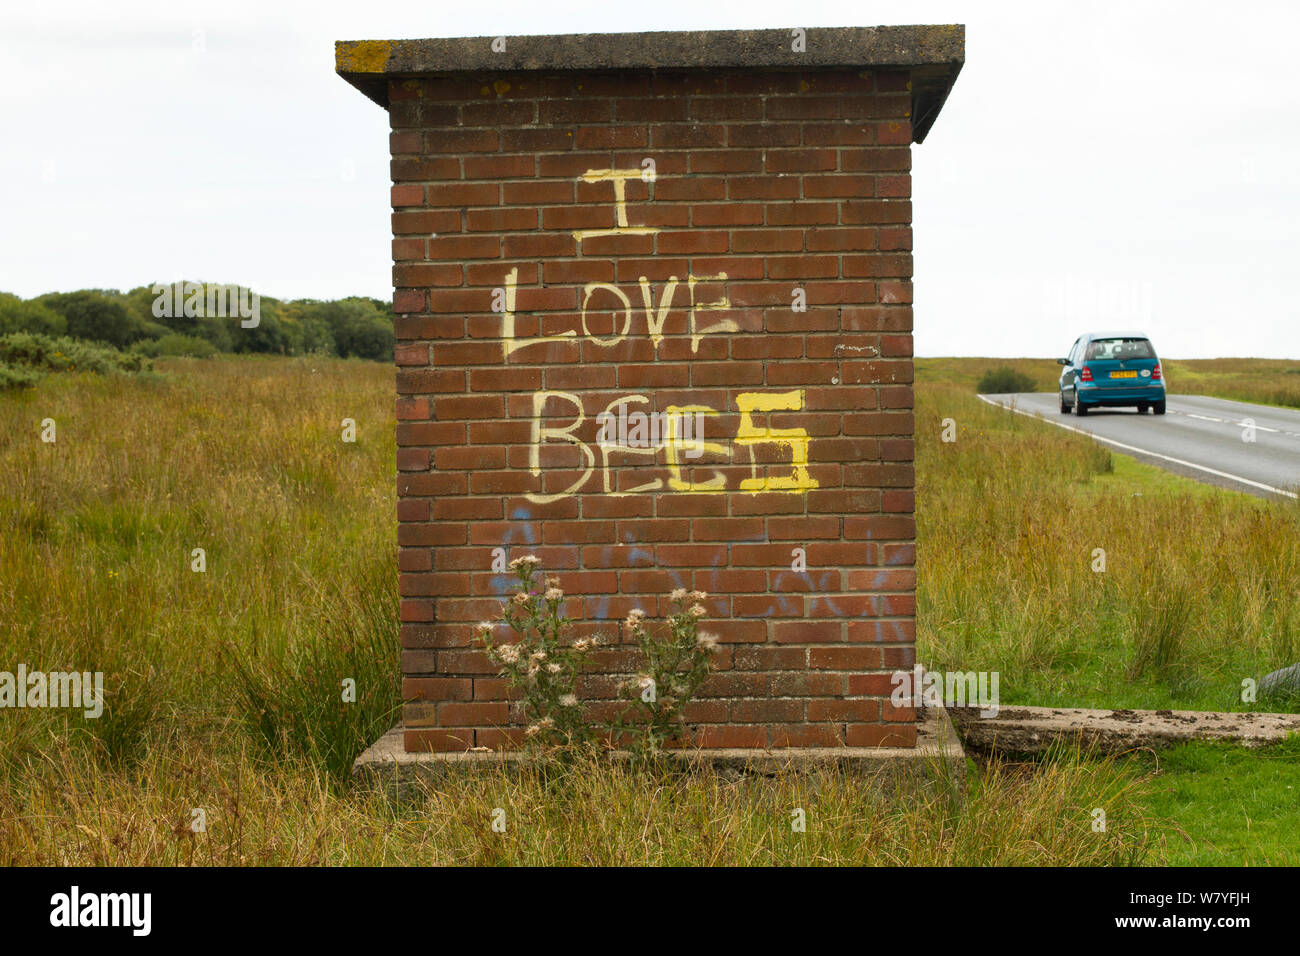 Graffiti on old bus stop saying &#39;I love bees&#39;, Gower, West Wales, UK. August 2014. Stock Photo